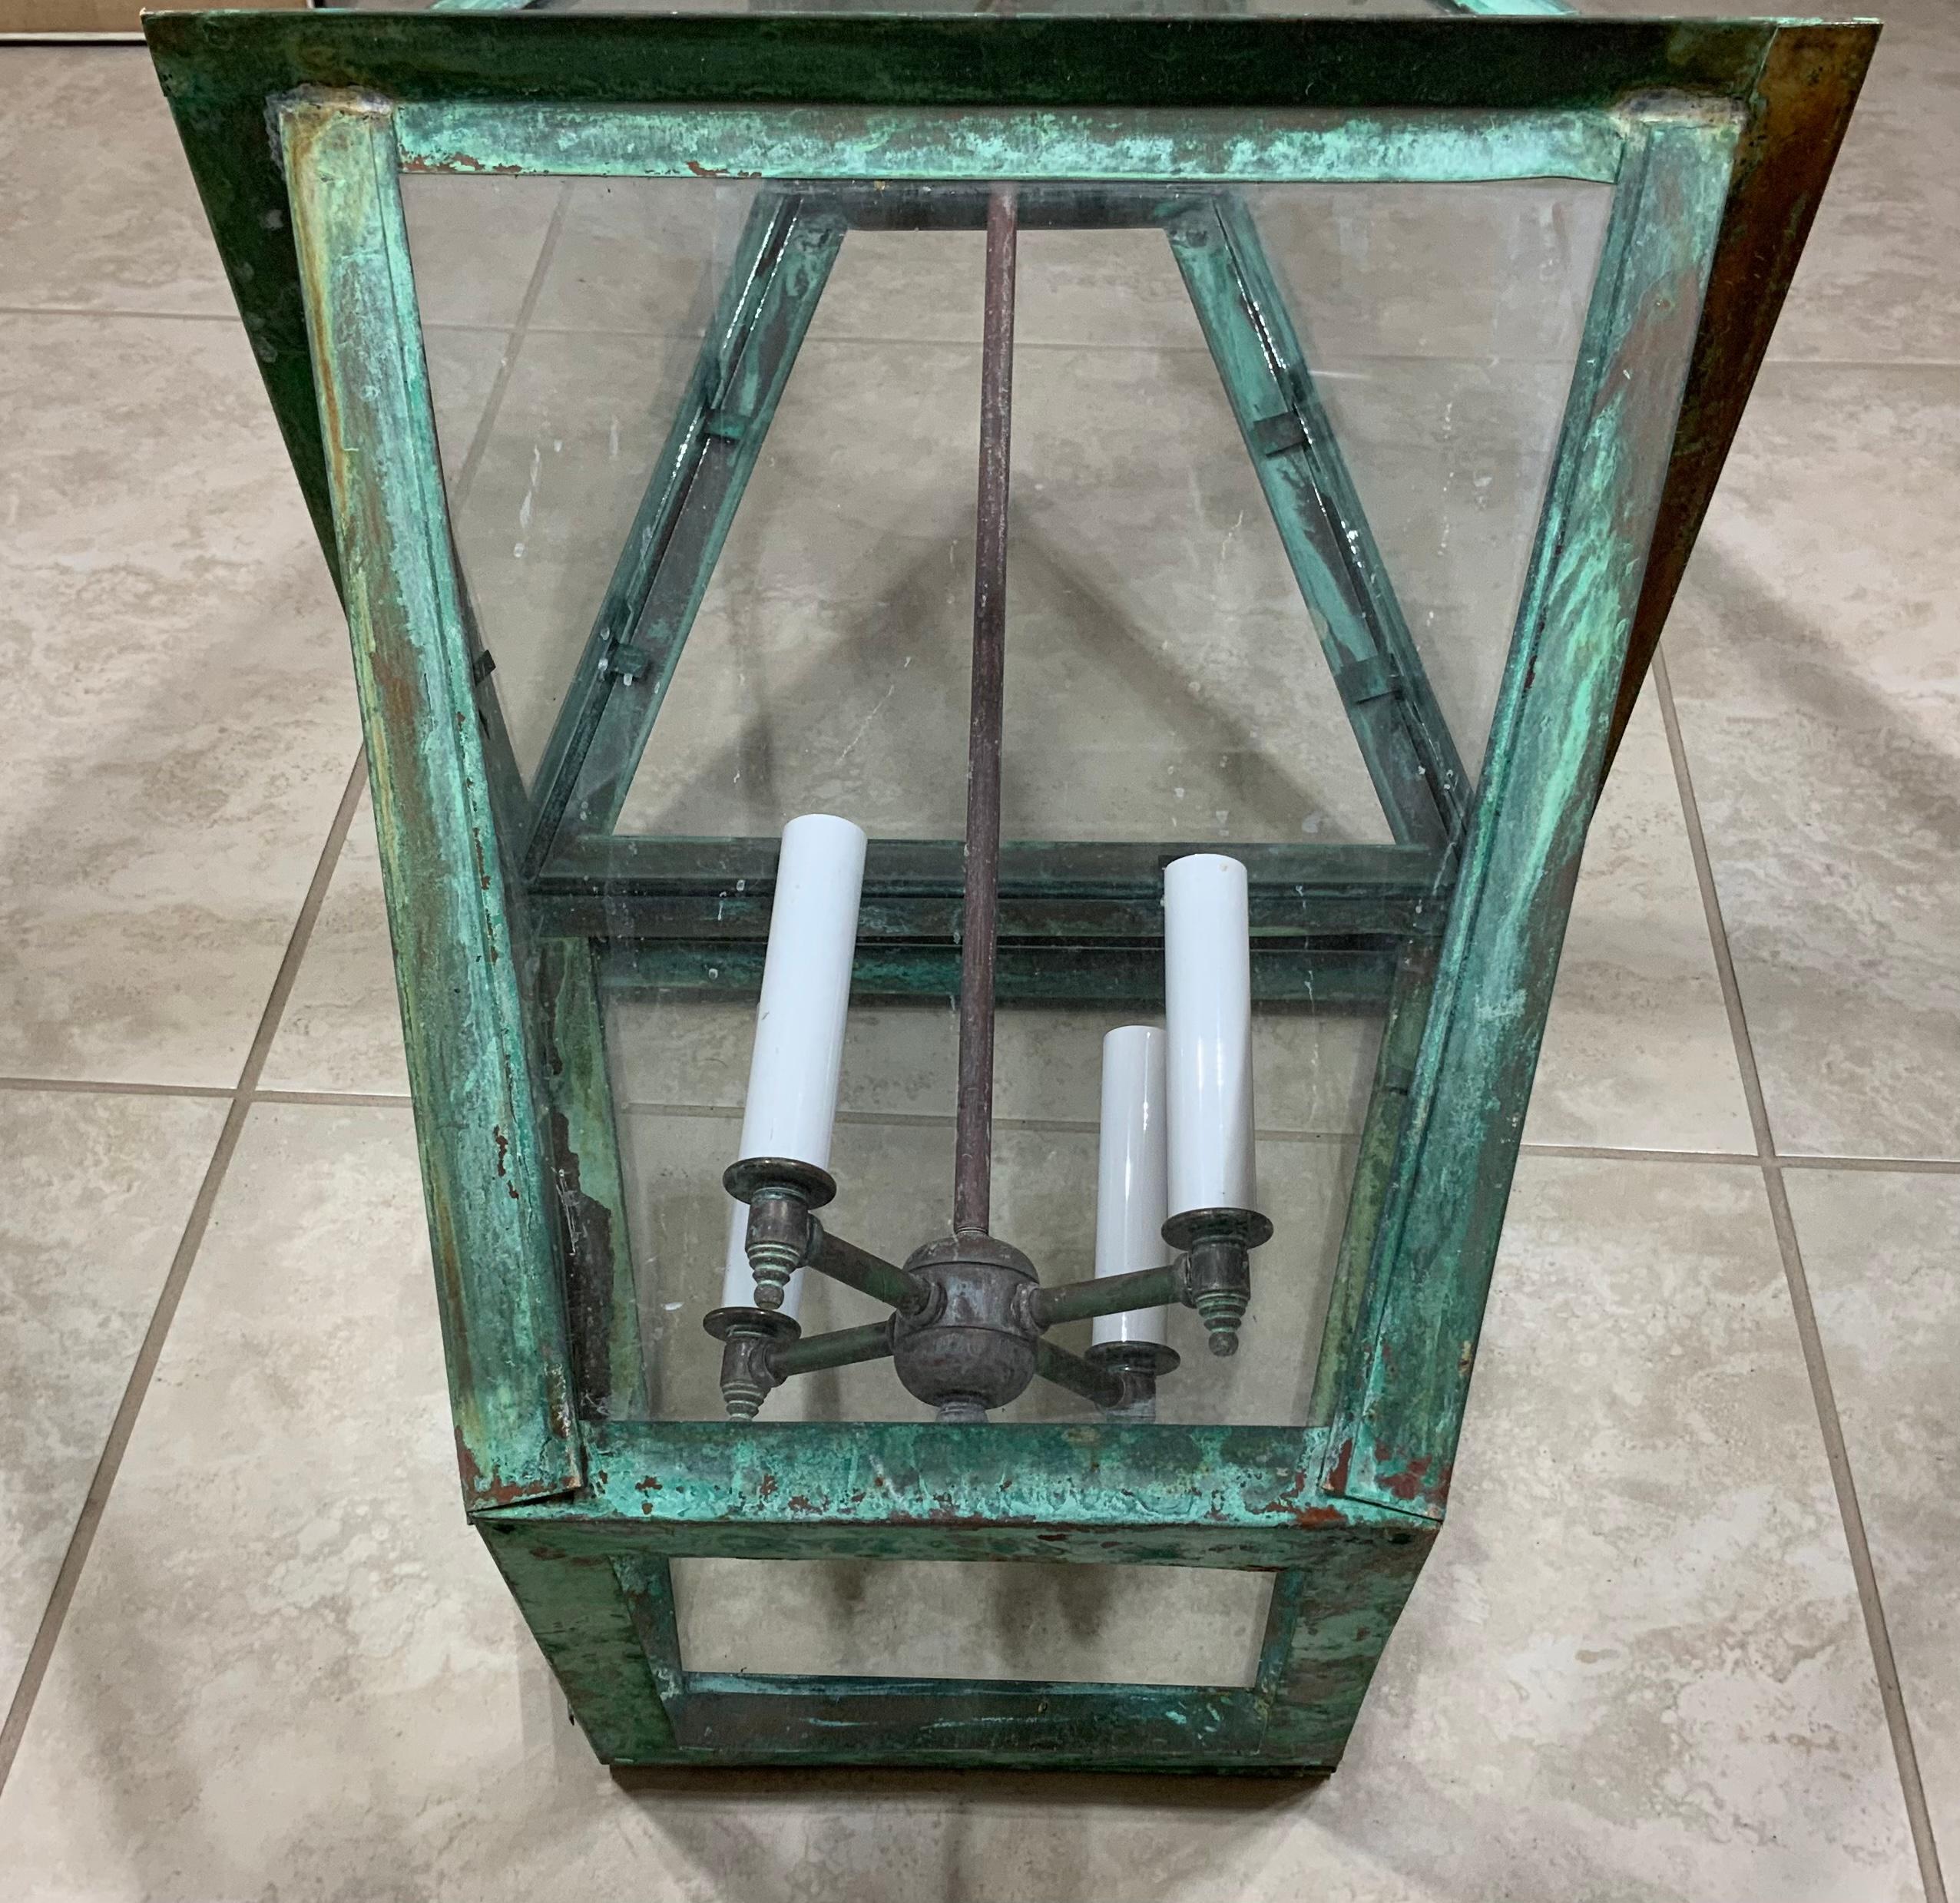 Quality hand forge solid copper lantern with four 60 watt lights.
Electrified and ready to light. Beautiful oxidization patina.
Made in the US and UL approved. Suitable for wet locations 
Copper canopy included.
Chain and canopy included.